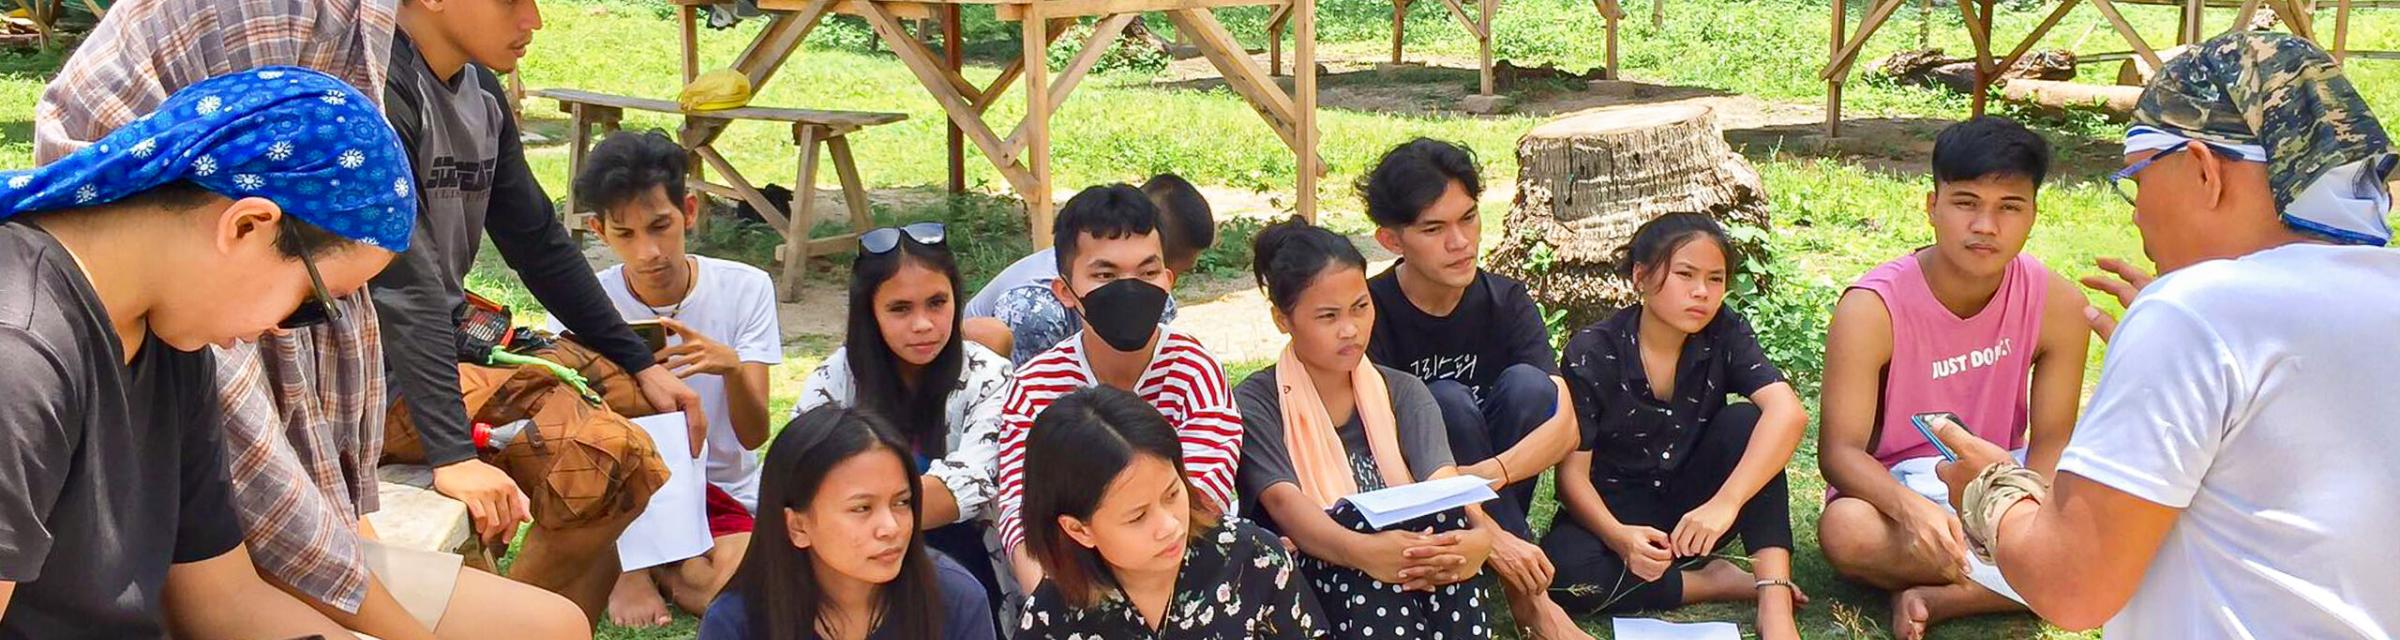 One of the ways Jo has seen God transform young people in her home country of the Philippines is through education ministries.